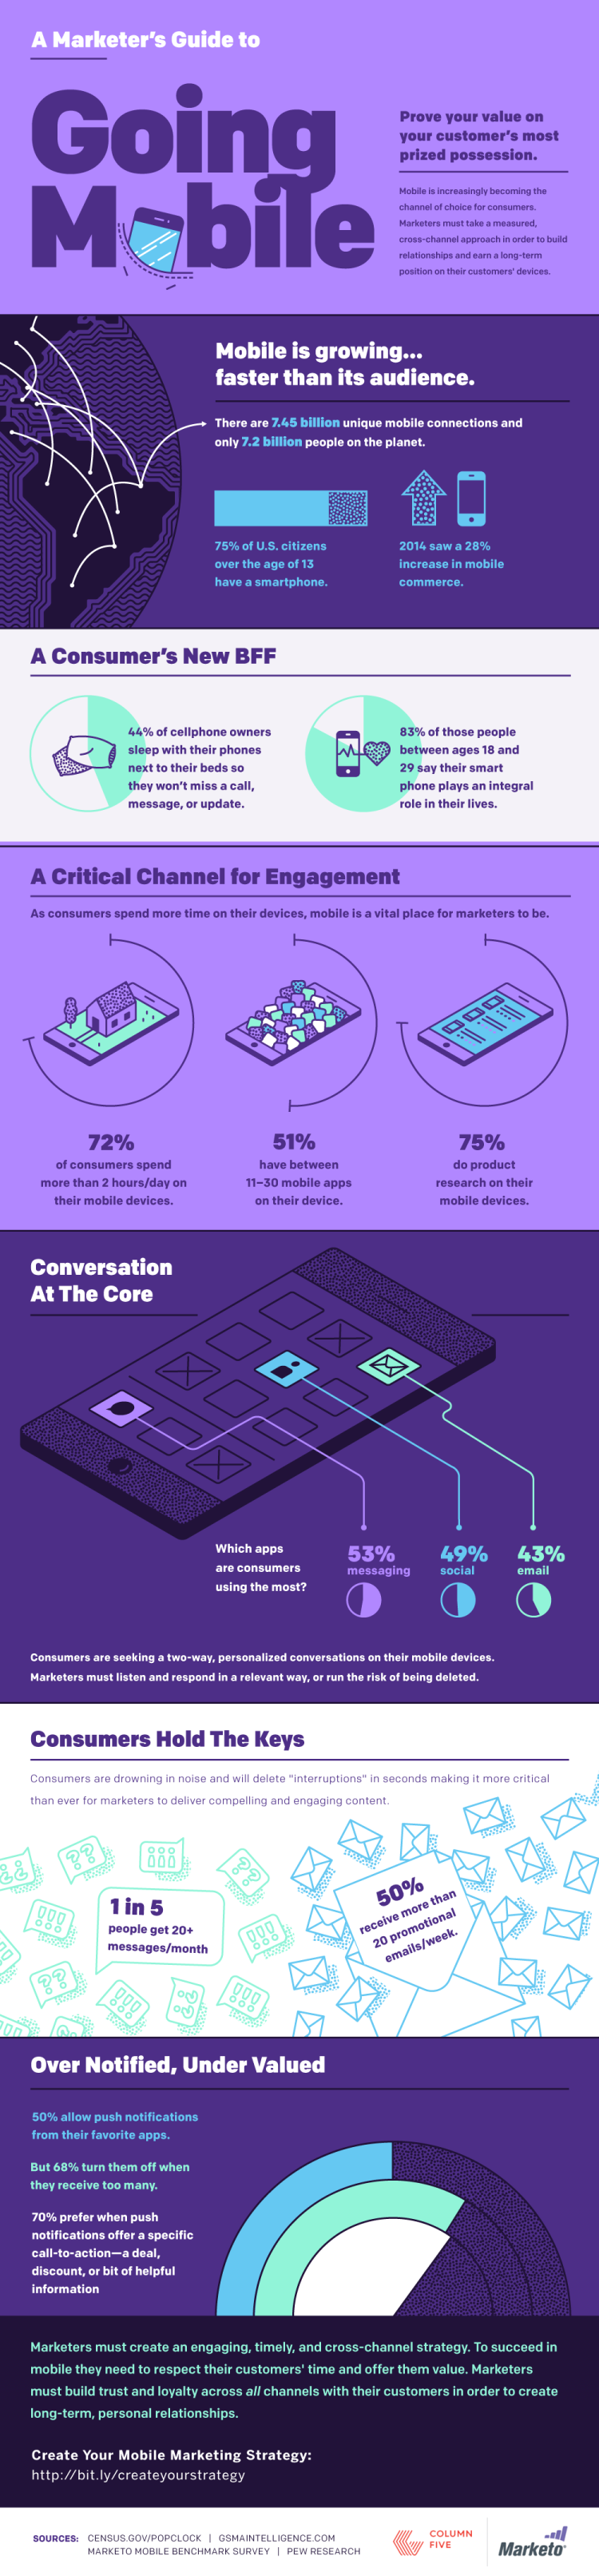 Going Mobile [Infographic]